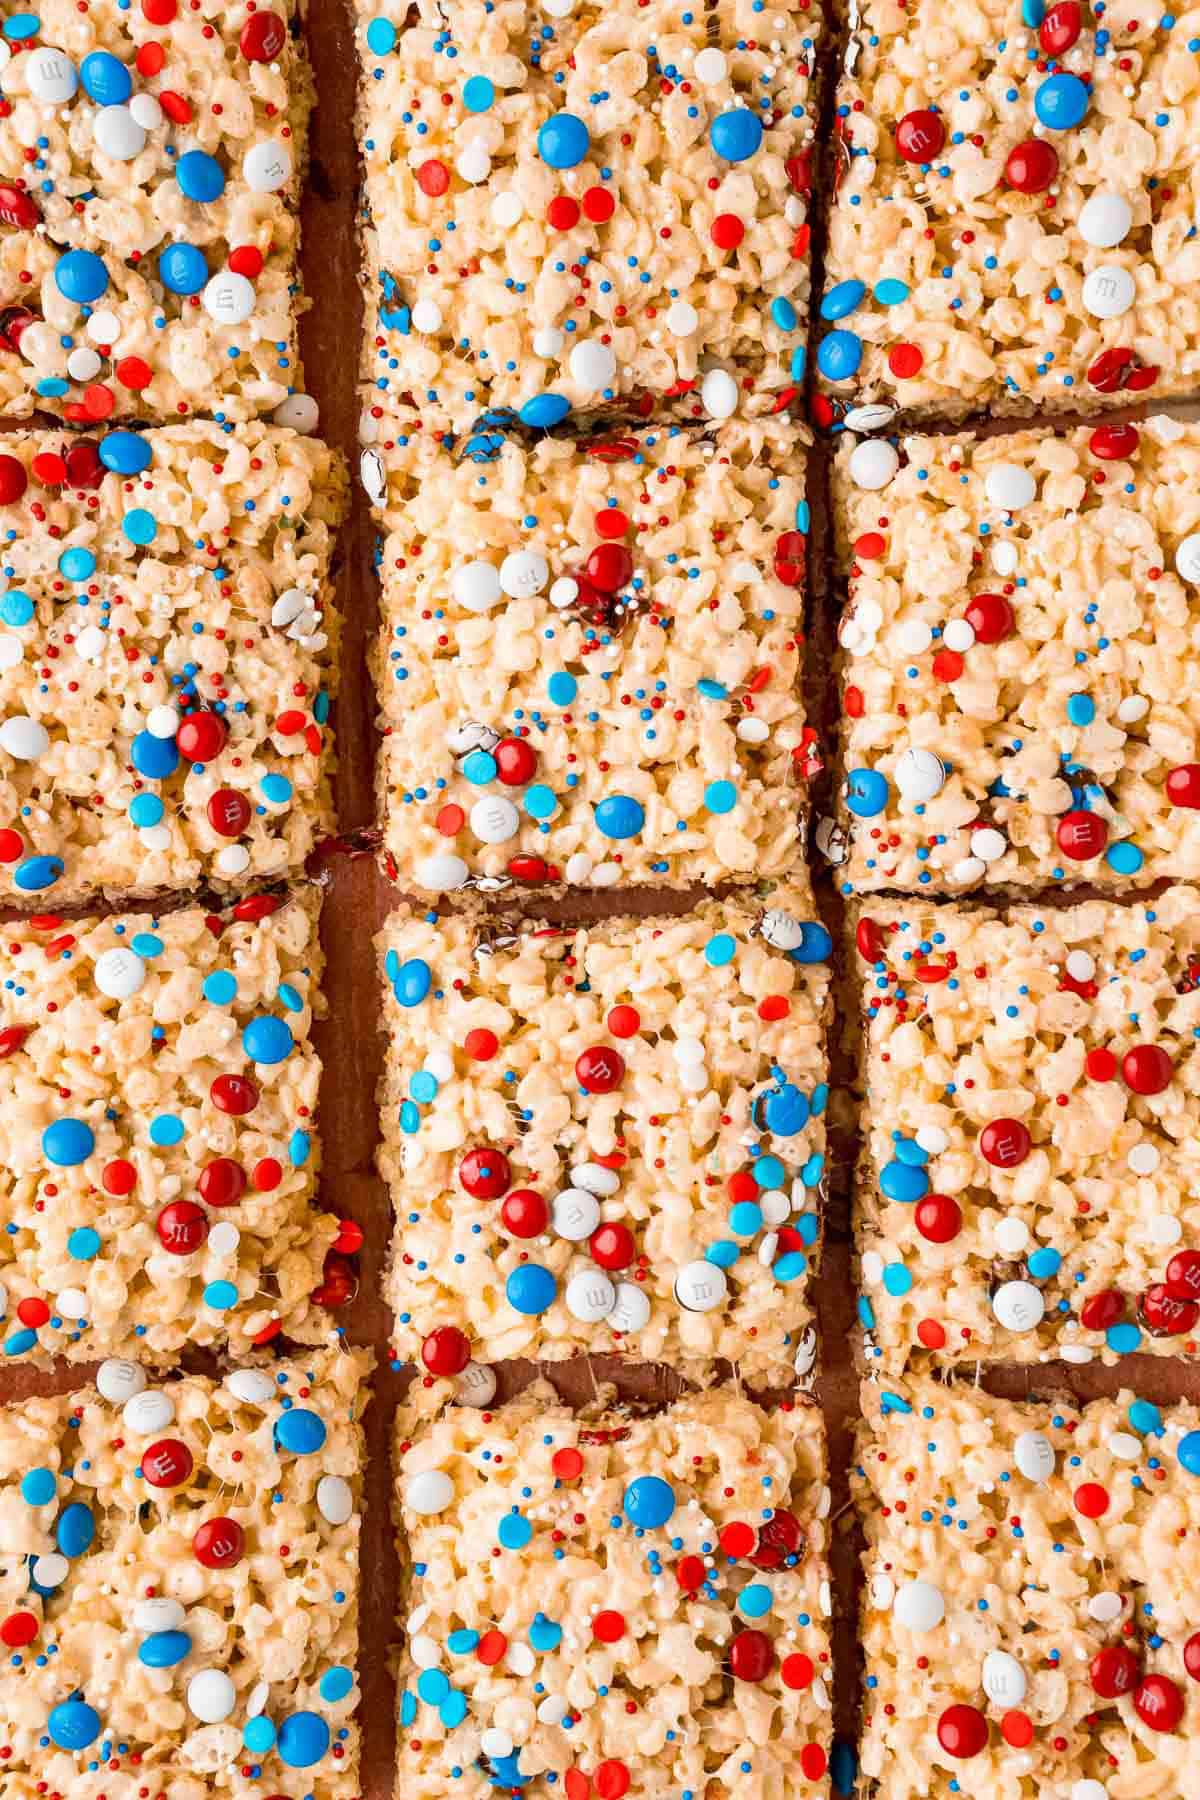 Red white and blue rice krispie treats cut into squares.